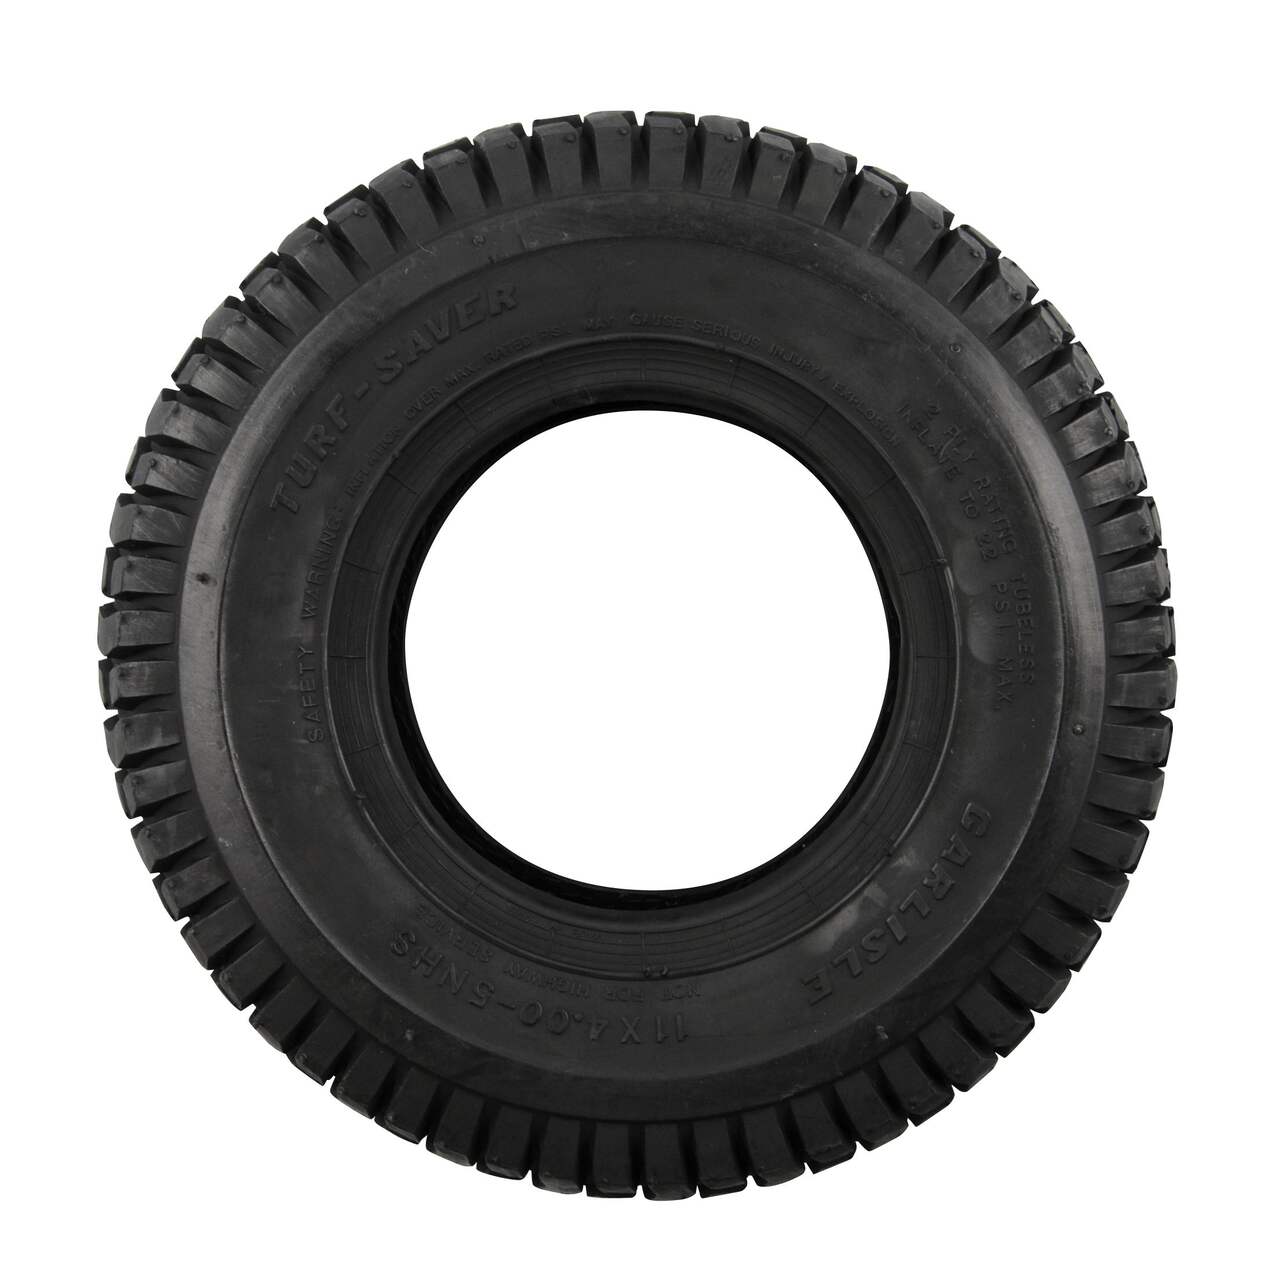 Atlas 2 Ply Lawn Tractor & ATV Replacement Tire, 11 x 4-5-in